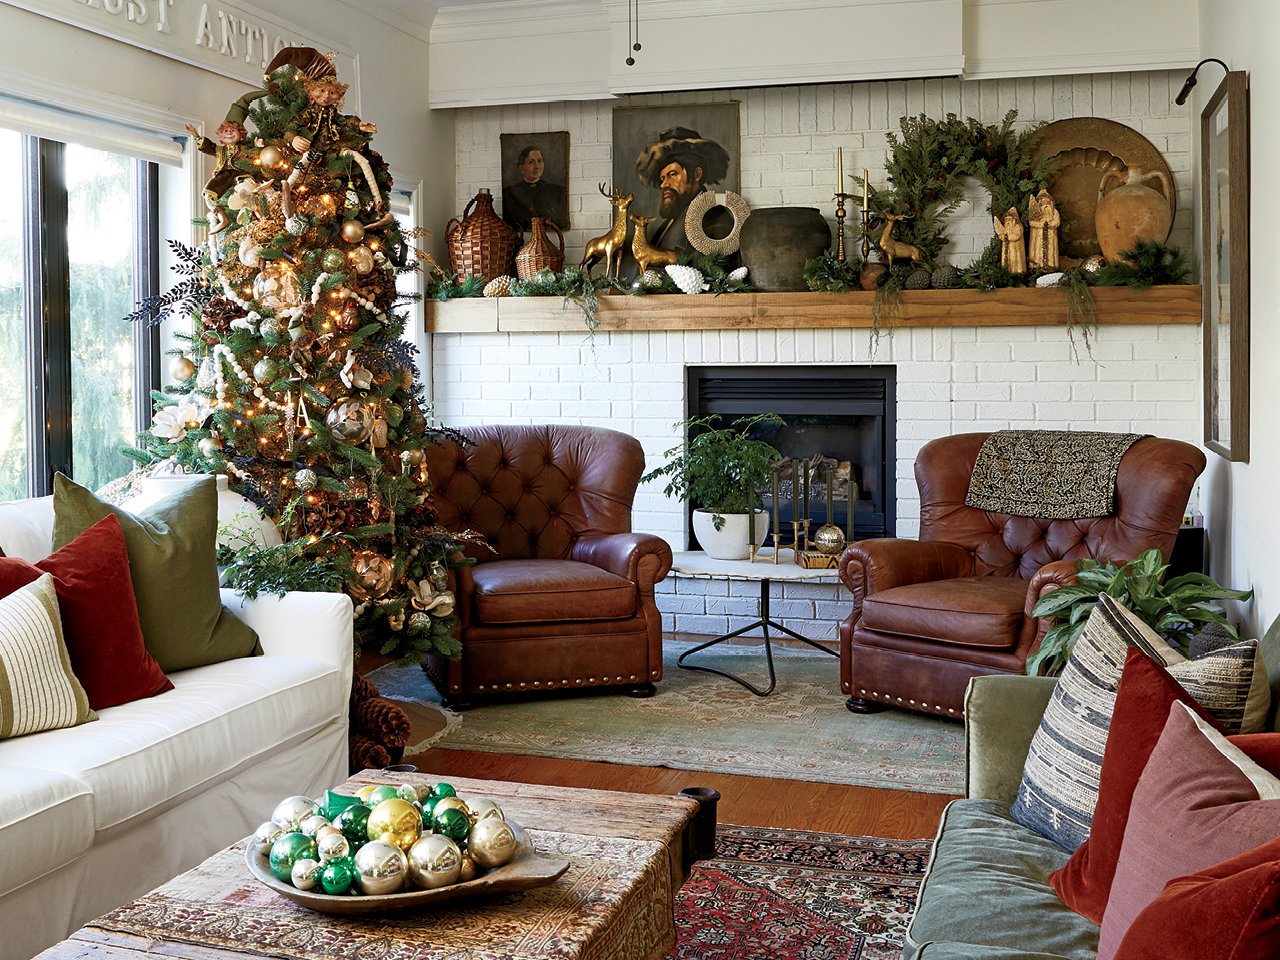 A Christmas tree in front of a whitewashed brick fireplace, with two brown leather armchairs and a coffee table with a bowl of Christmas ornaments in the foreground